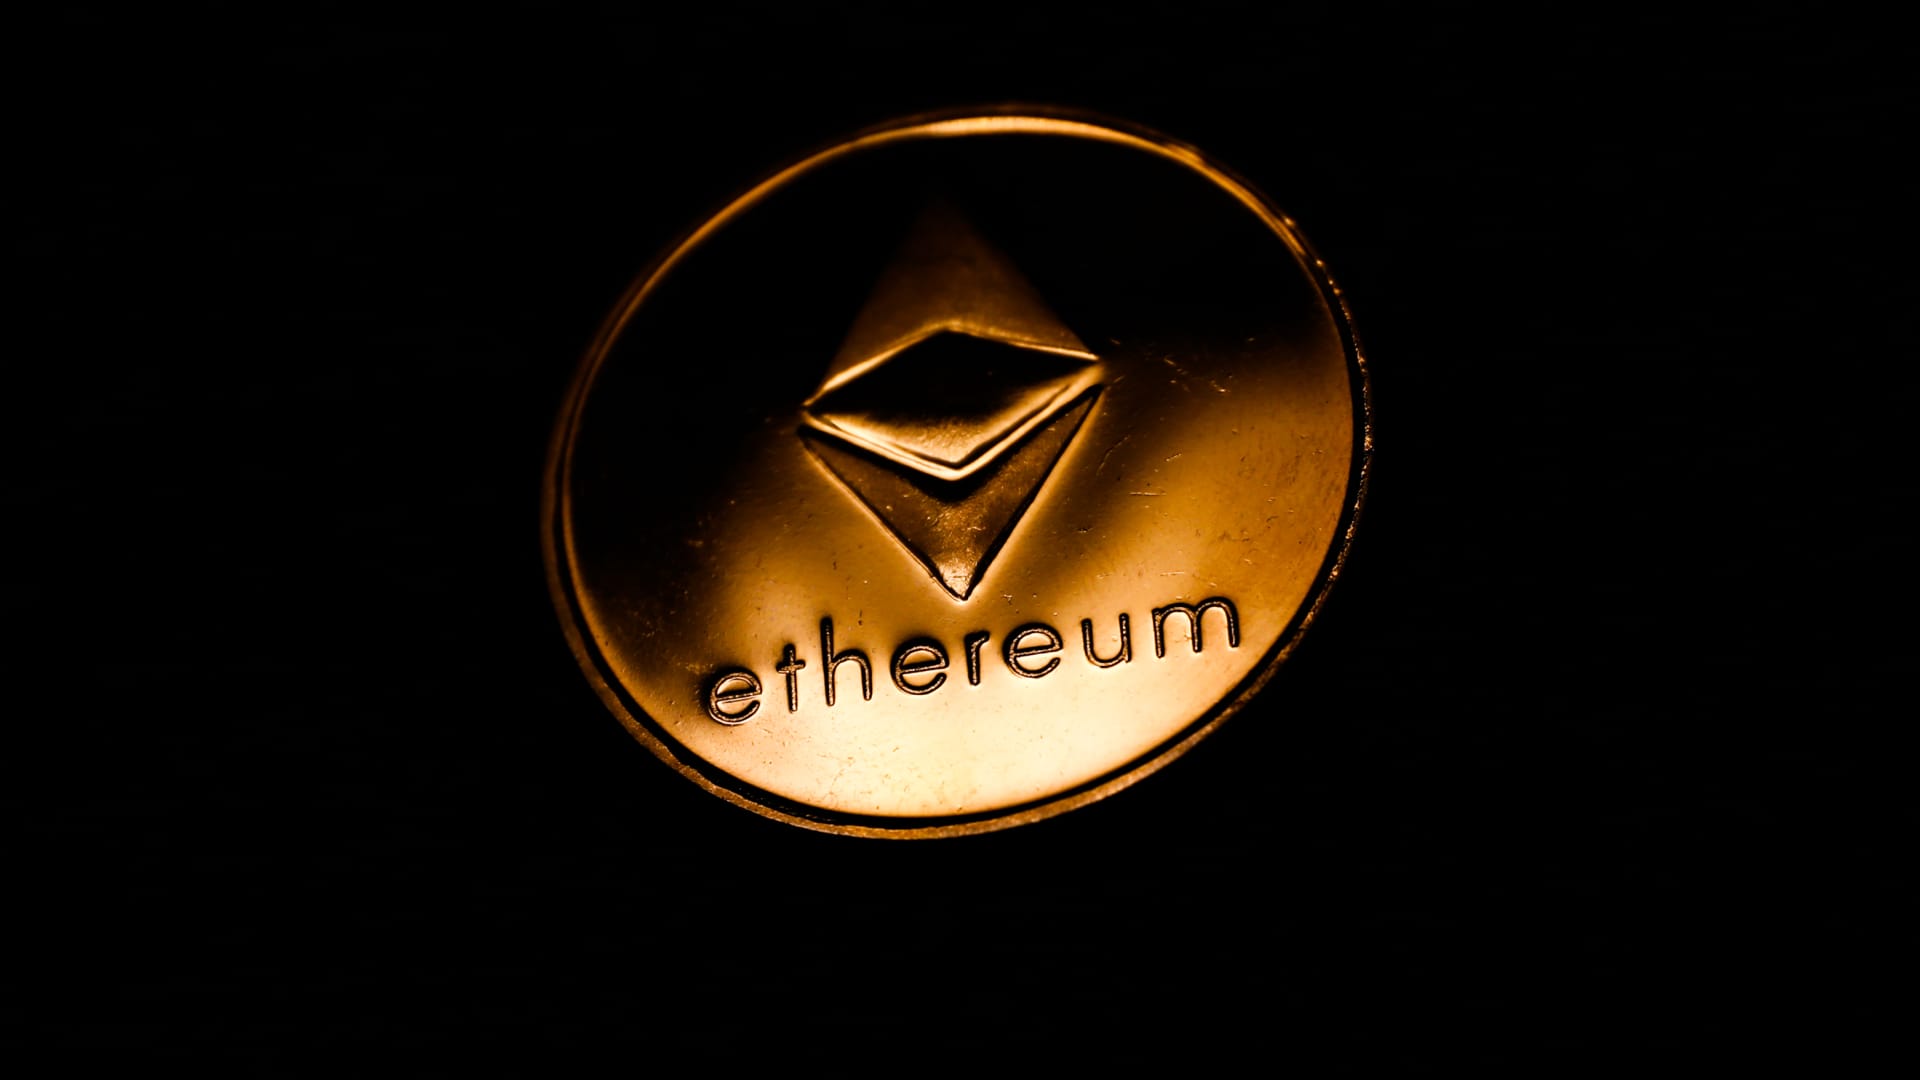 Ether is rallying ahead of major upgrade that will let holders more easily access their tokens